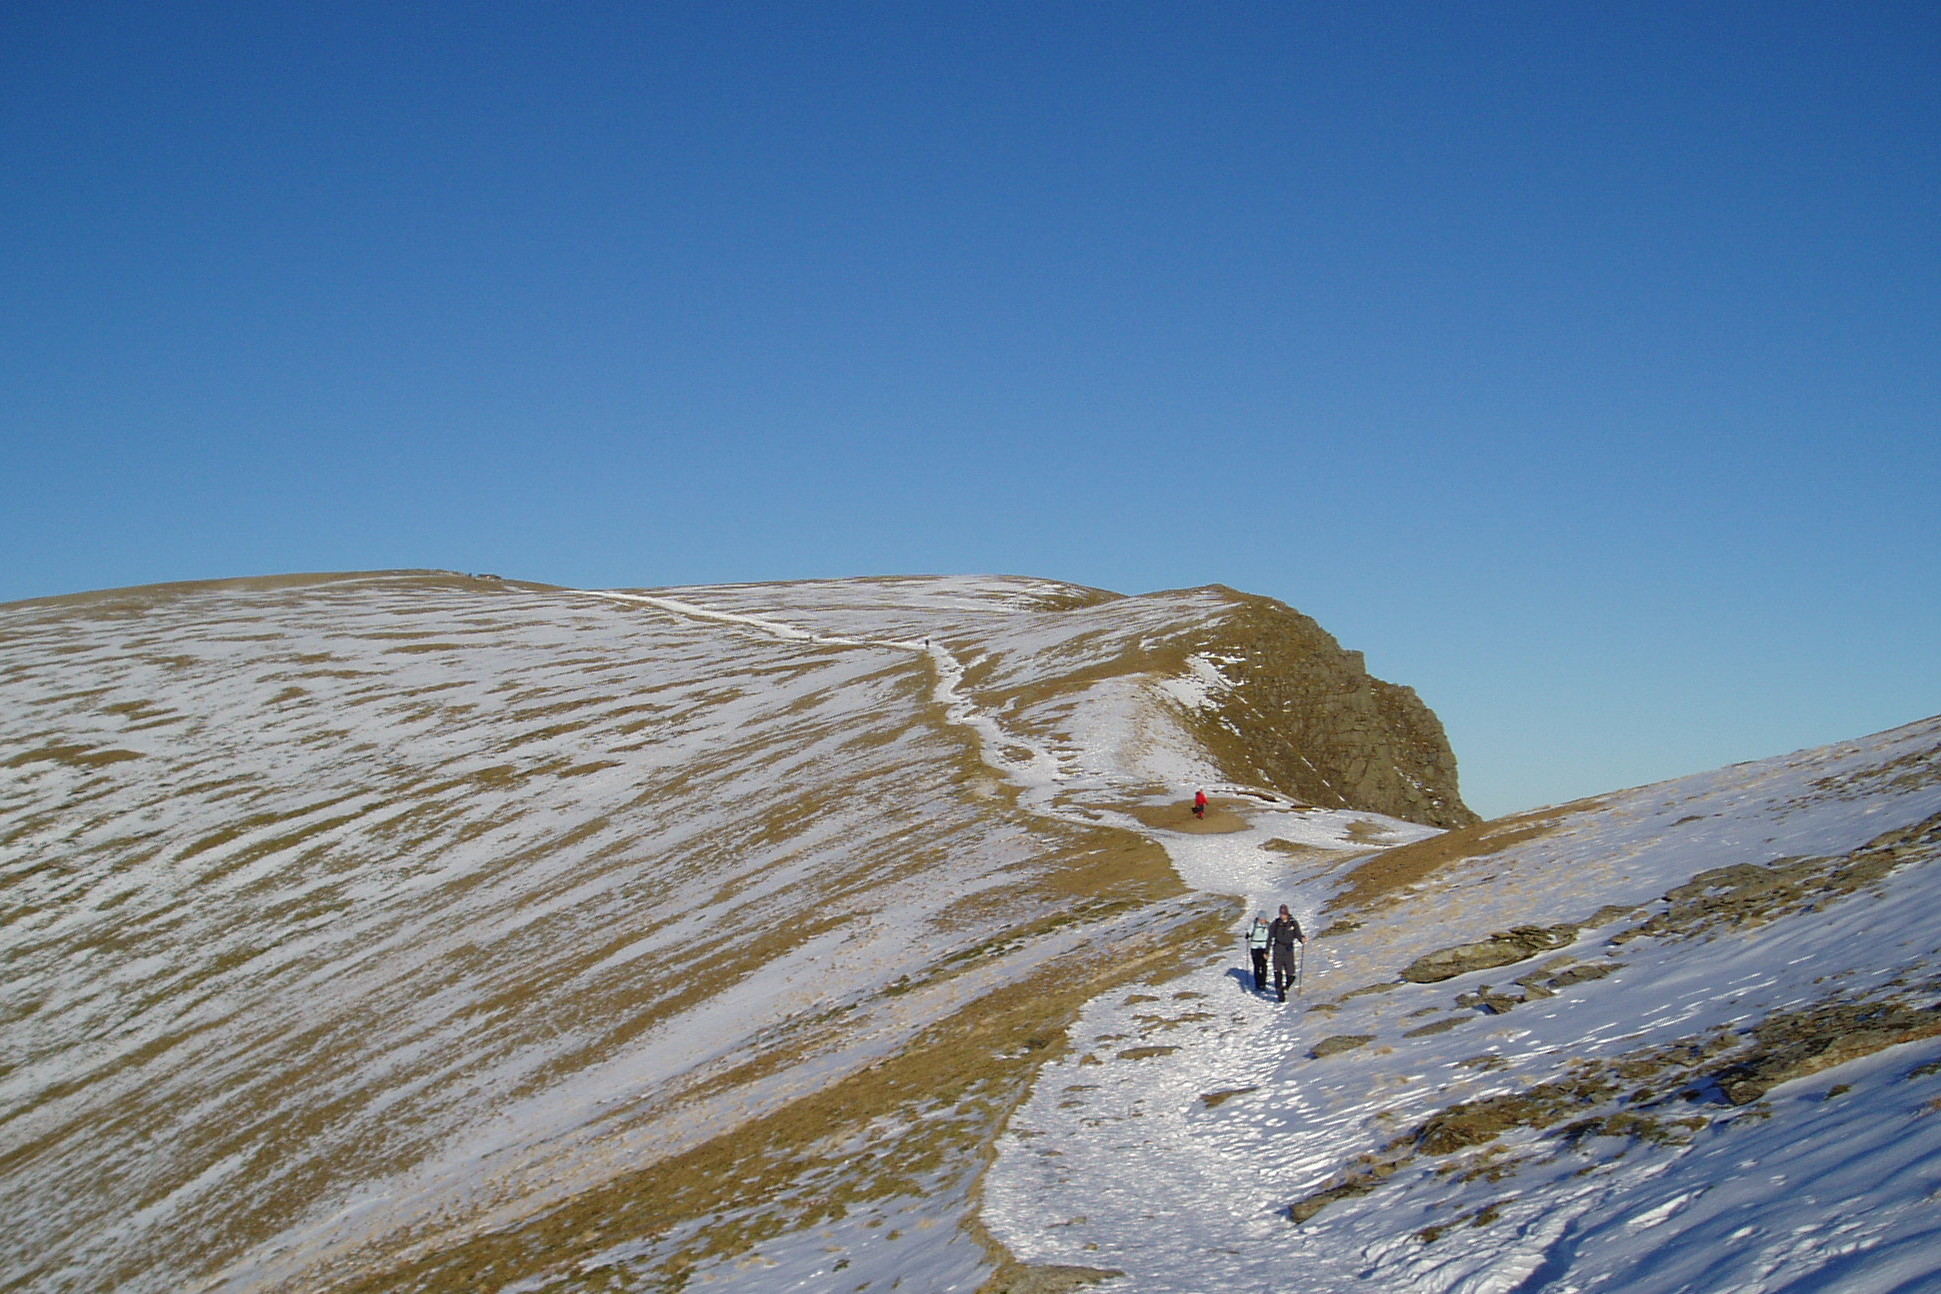 Helvellyn is a serious ascent, especially in winter conditions. Image by Steve Cadman / CC BY-SA 2.0